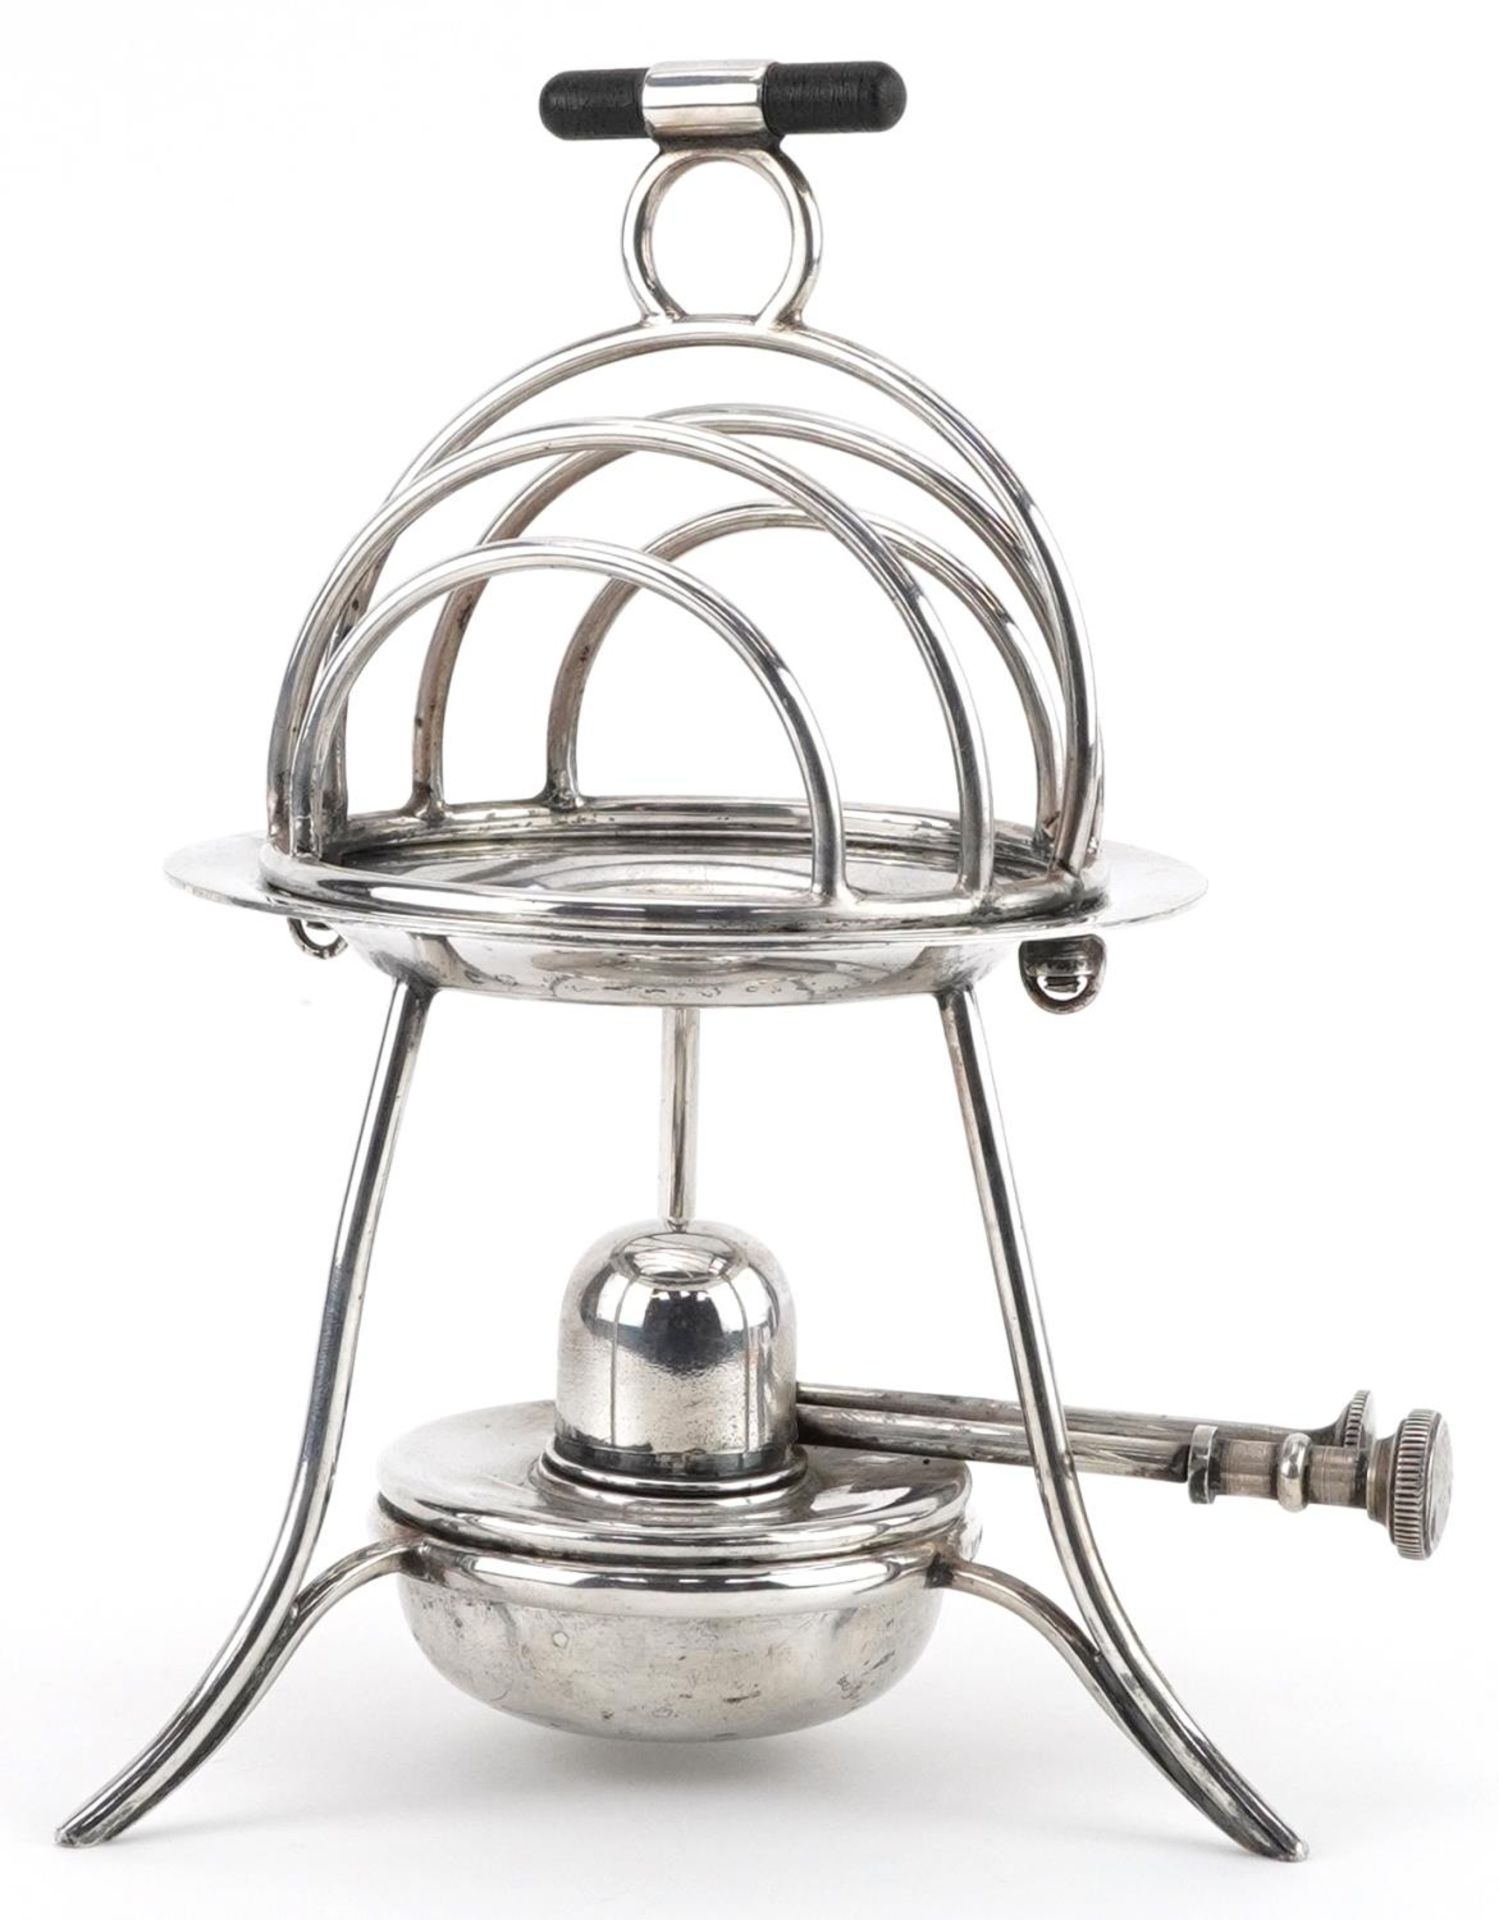 Asprey & Co, Edwardian silver plated heated toast rack with burner and ebonised handle, numbered